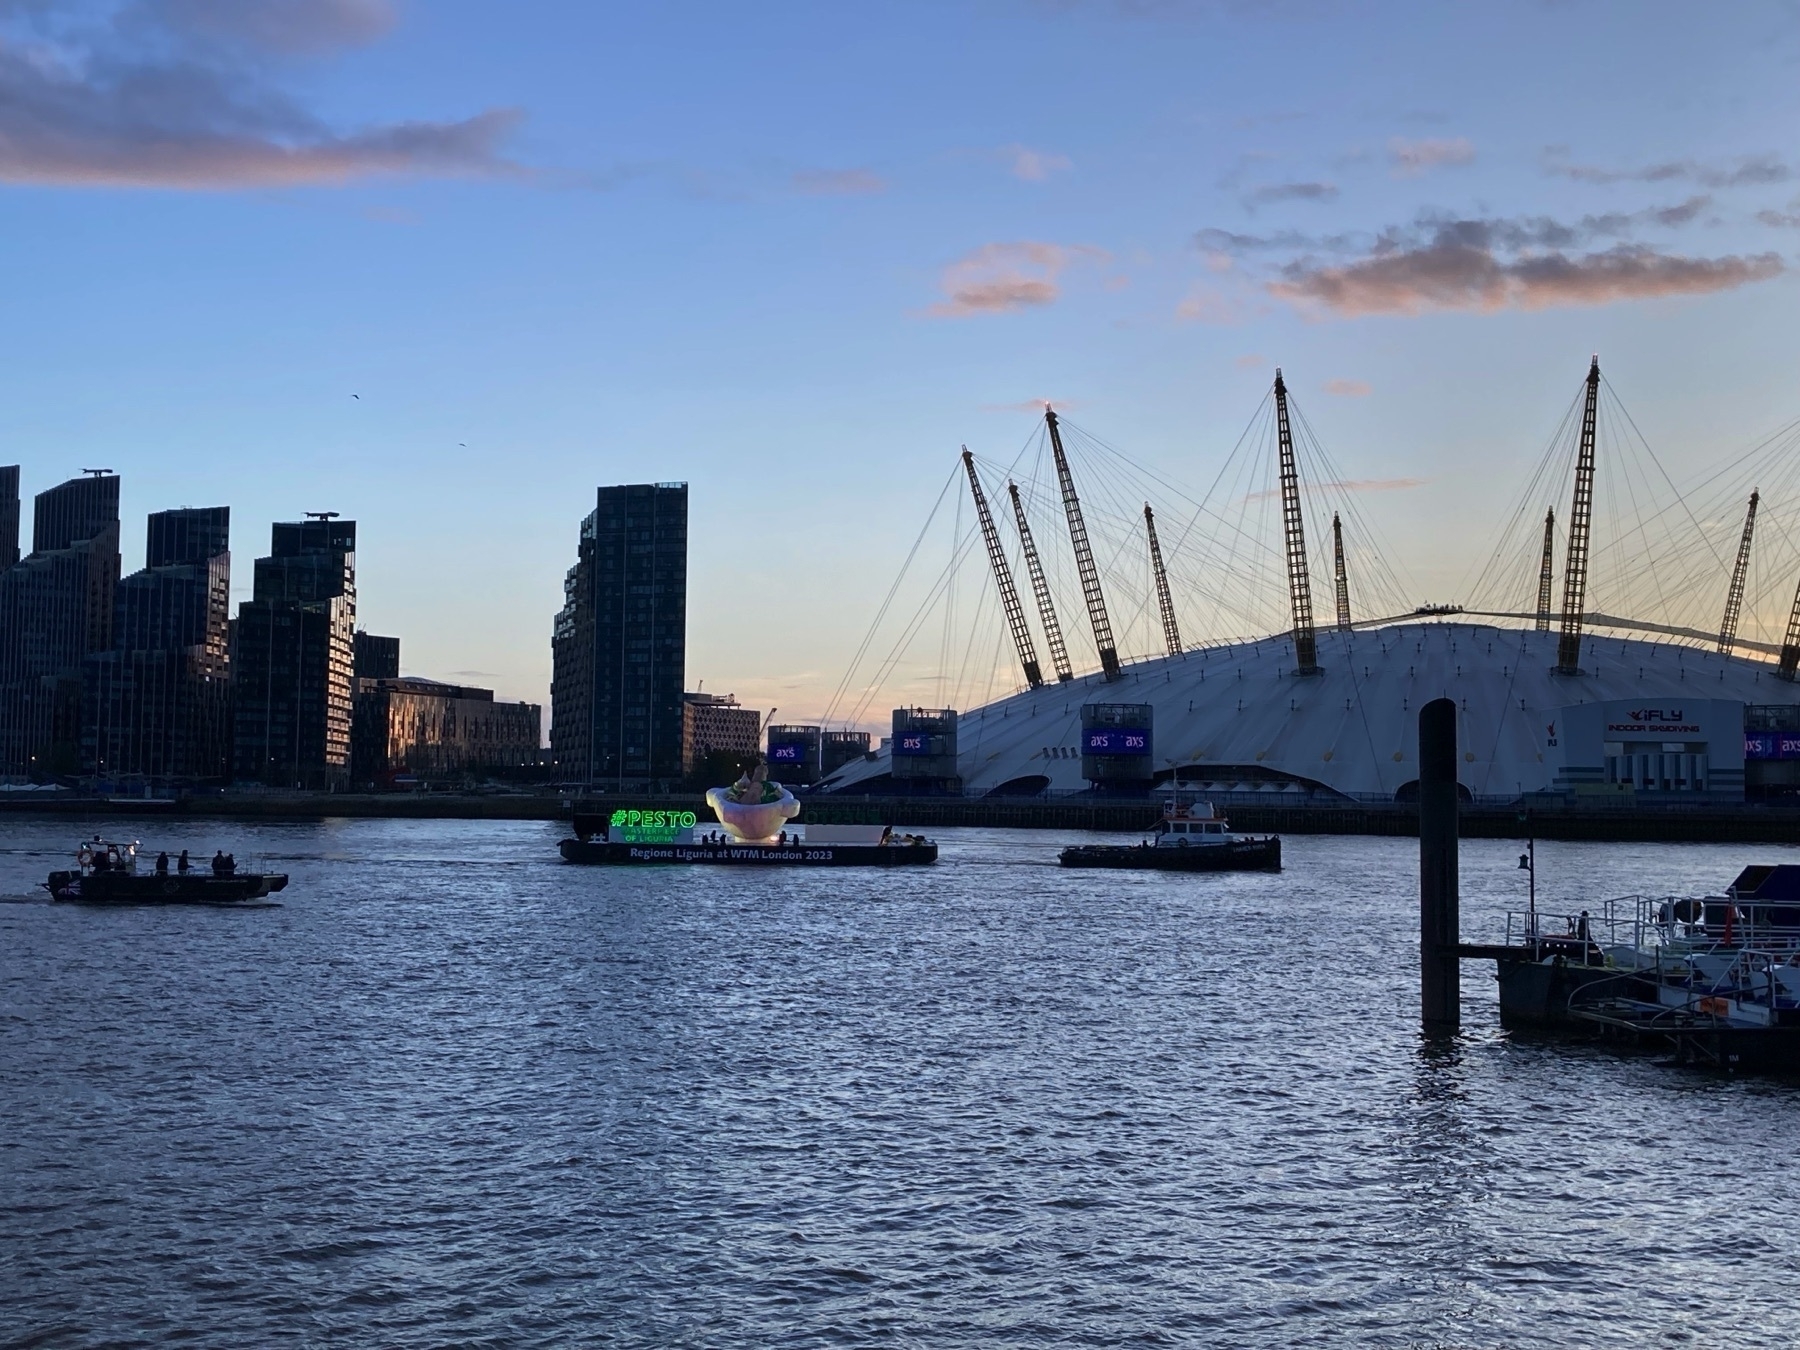 A float advertising pesto is being pulled up the Thames by a tugboat past the O2 dome on the Greenwich Peninsula as the sun sets.